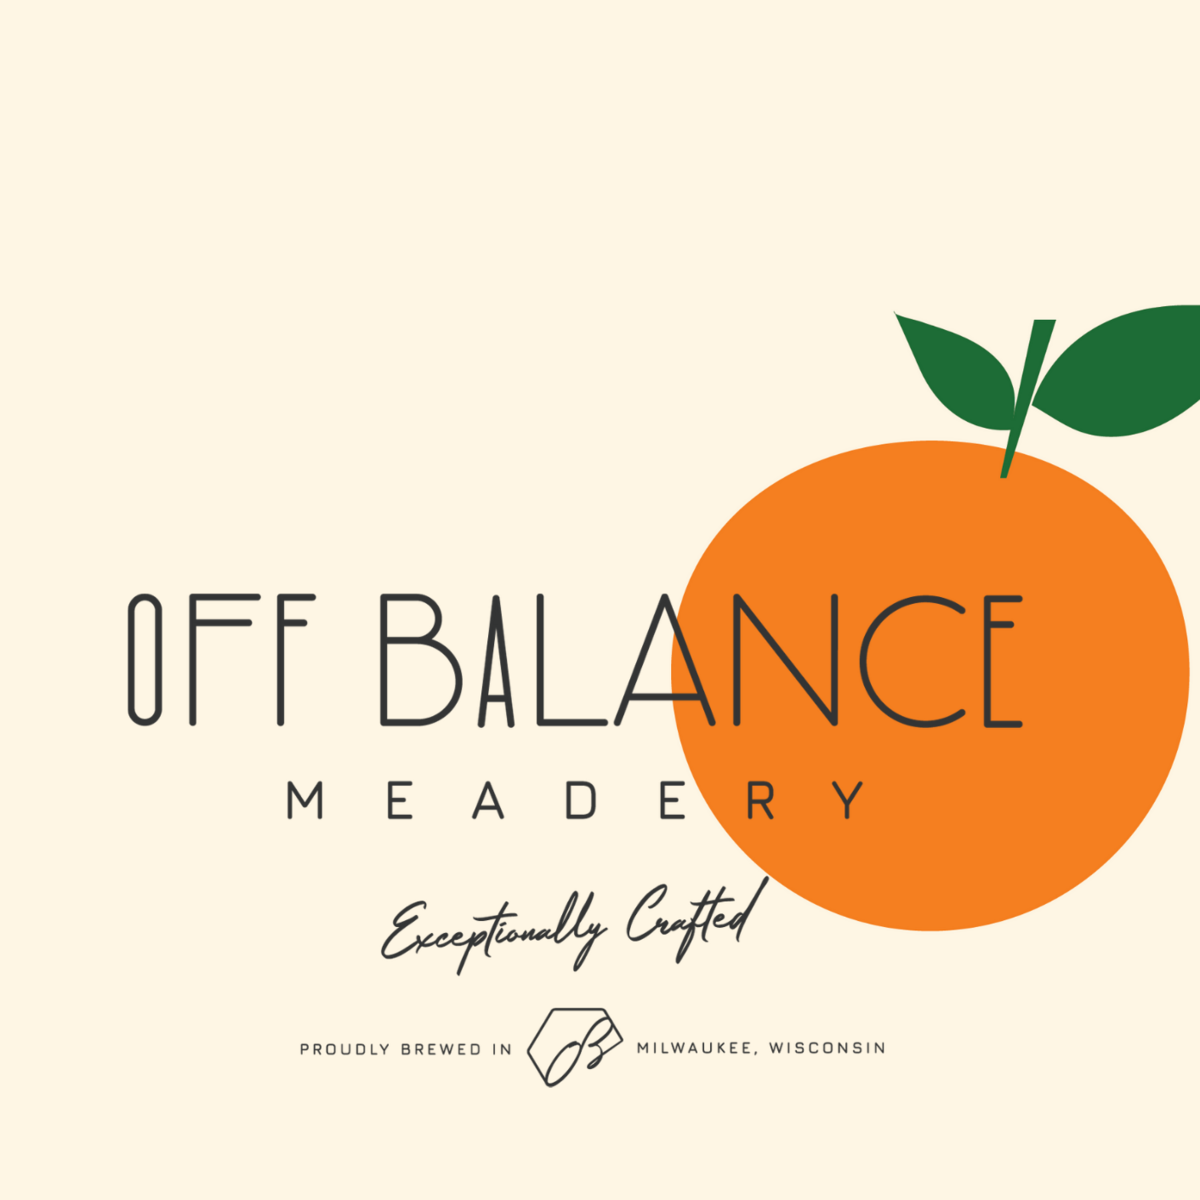 Copy of Off Balance Meadery Your Signature Brand Strategy v.2